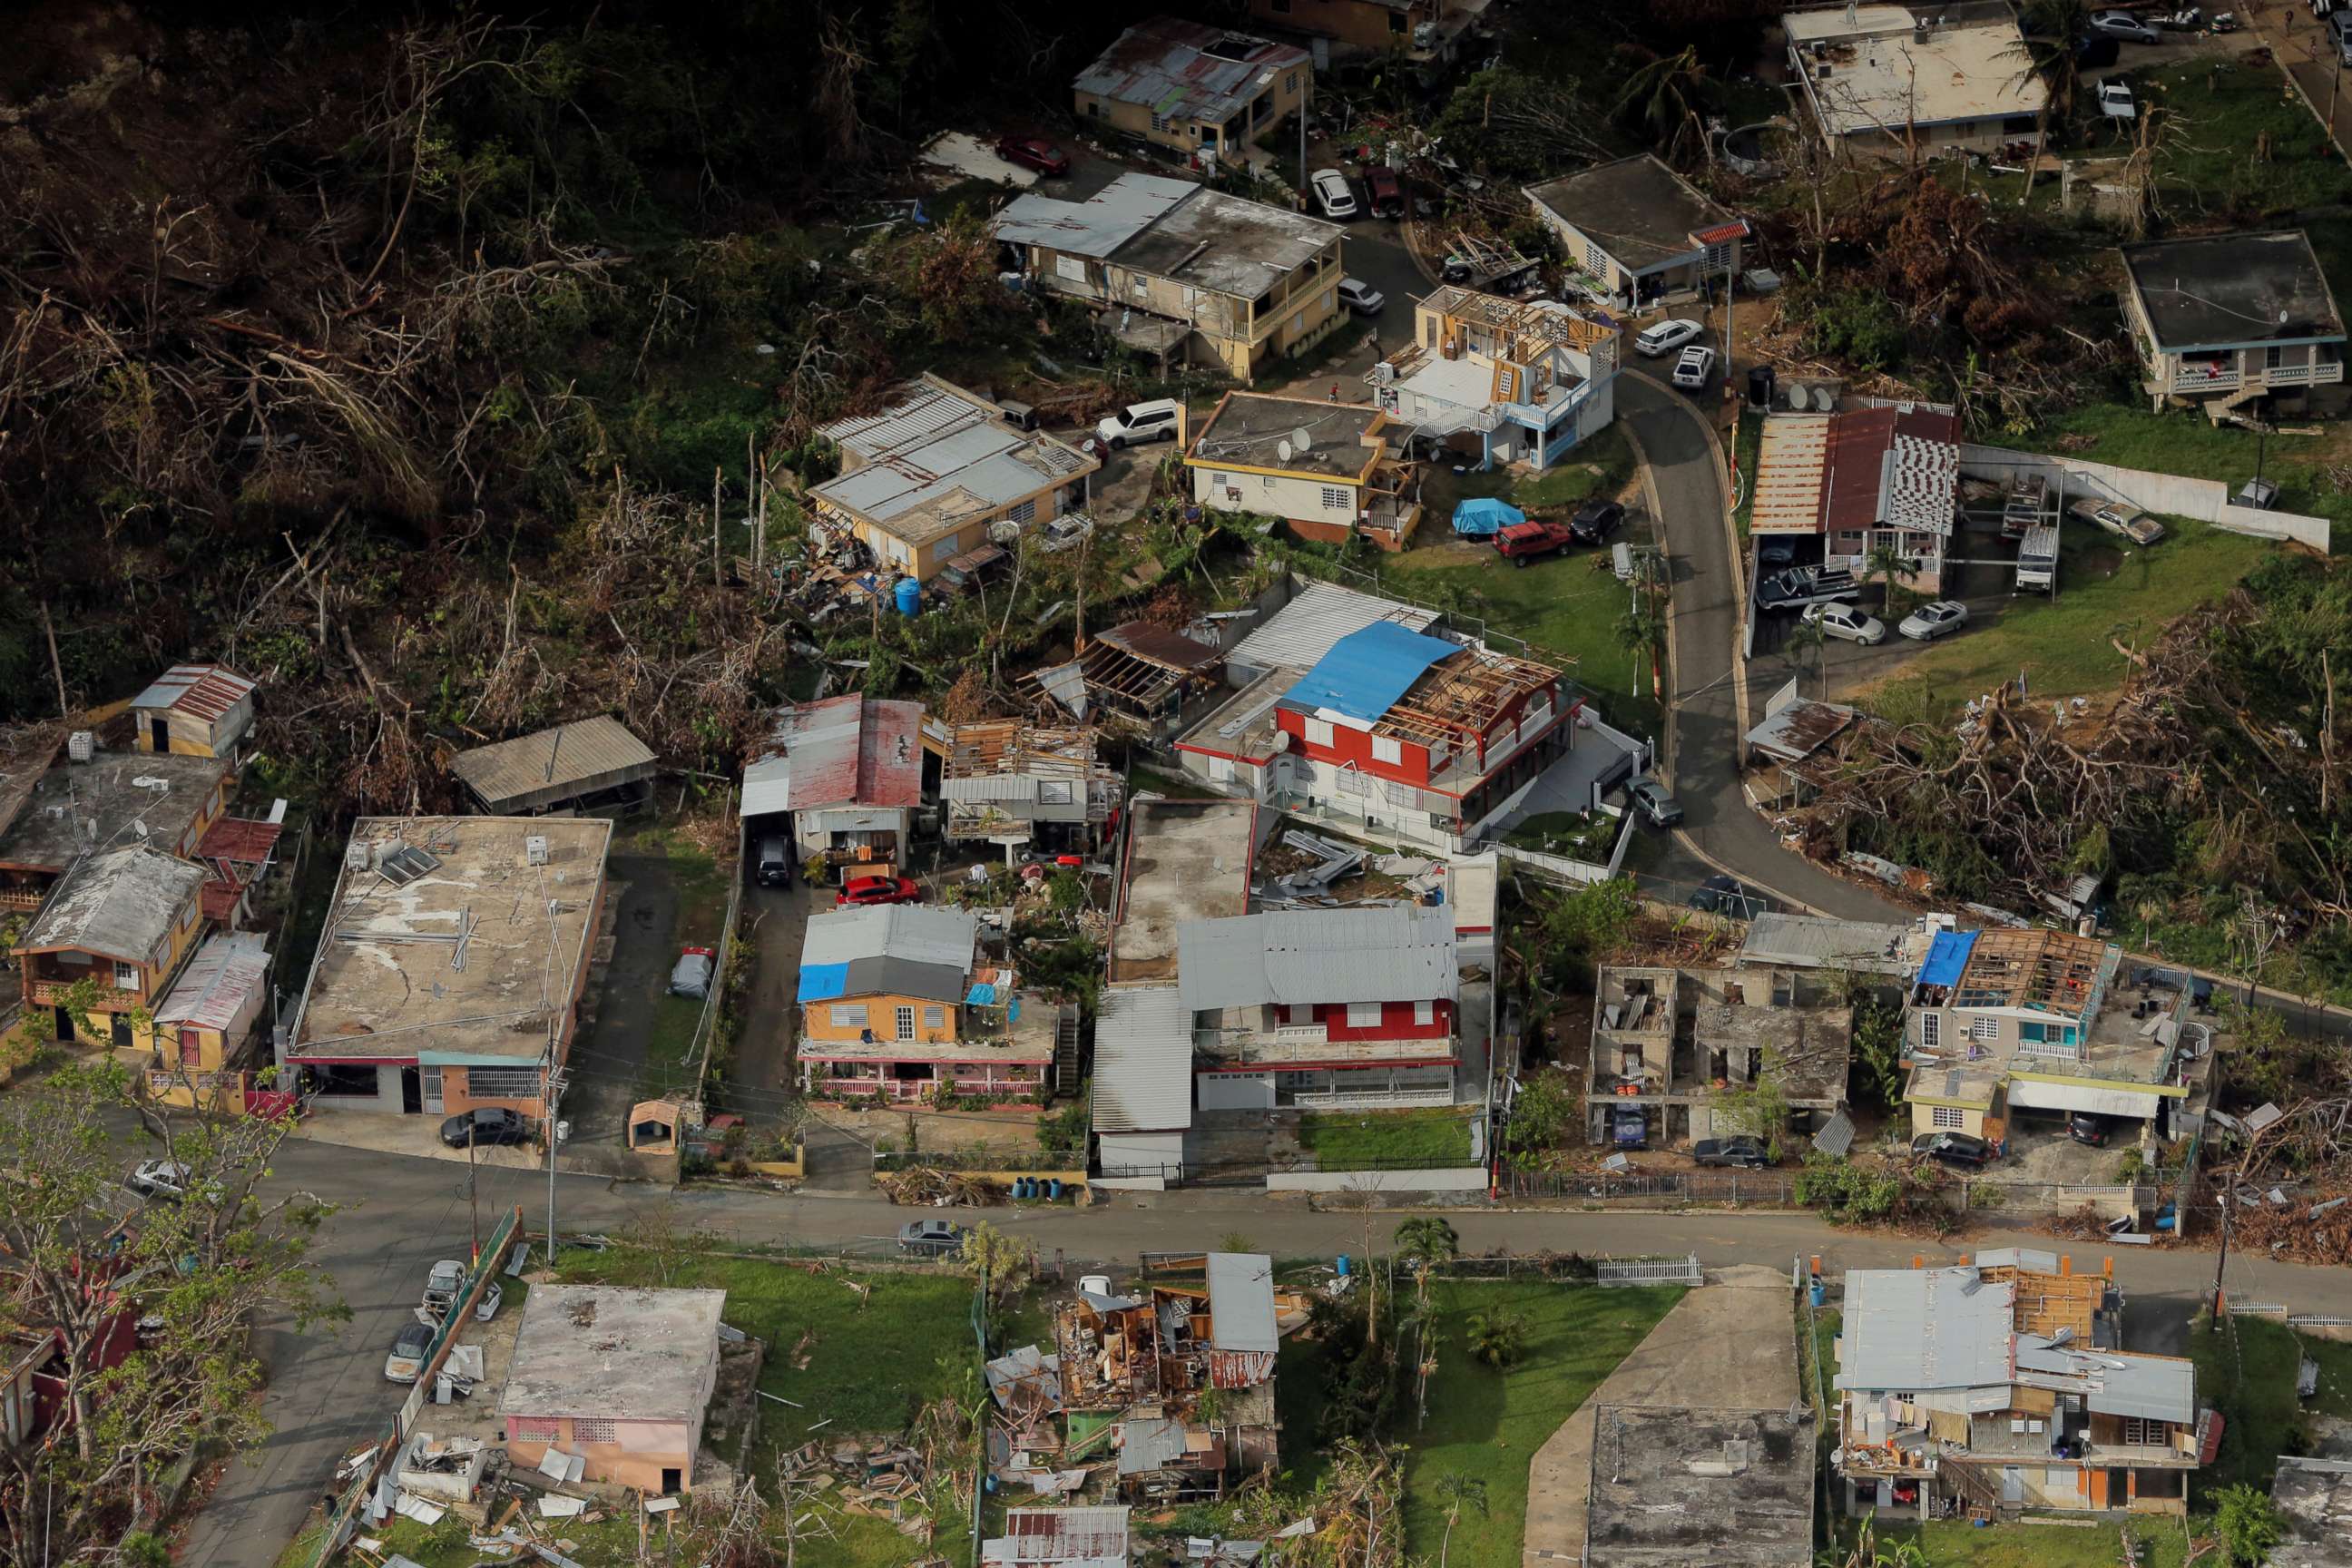 FILE PHOTO: Hurricane Maria in September 2017 would result in the worst natural disaster in the history of Puerto Rico, causing an estimated $90 billion in damage to the already economically struggling U.S. territory.